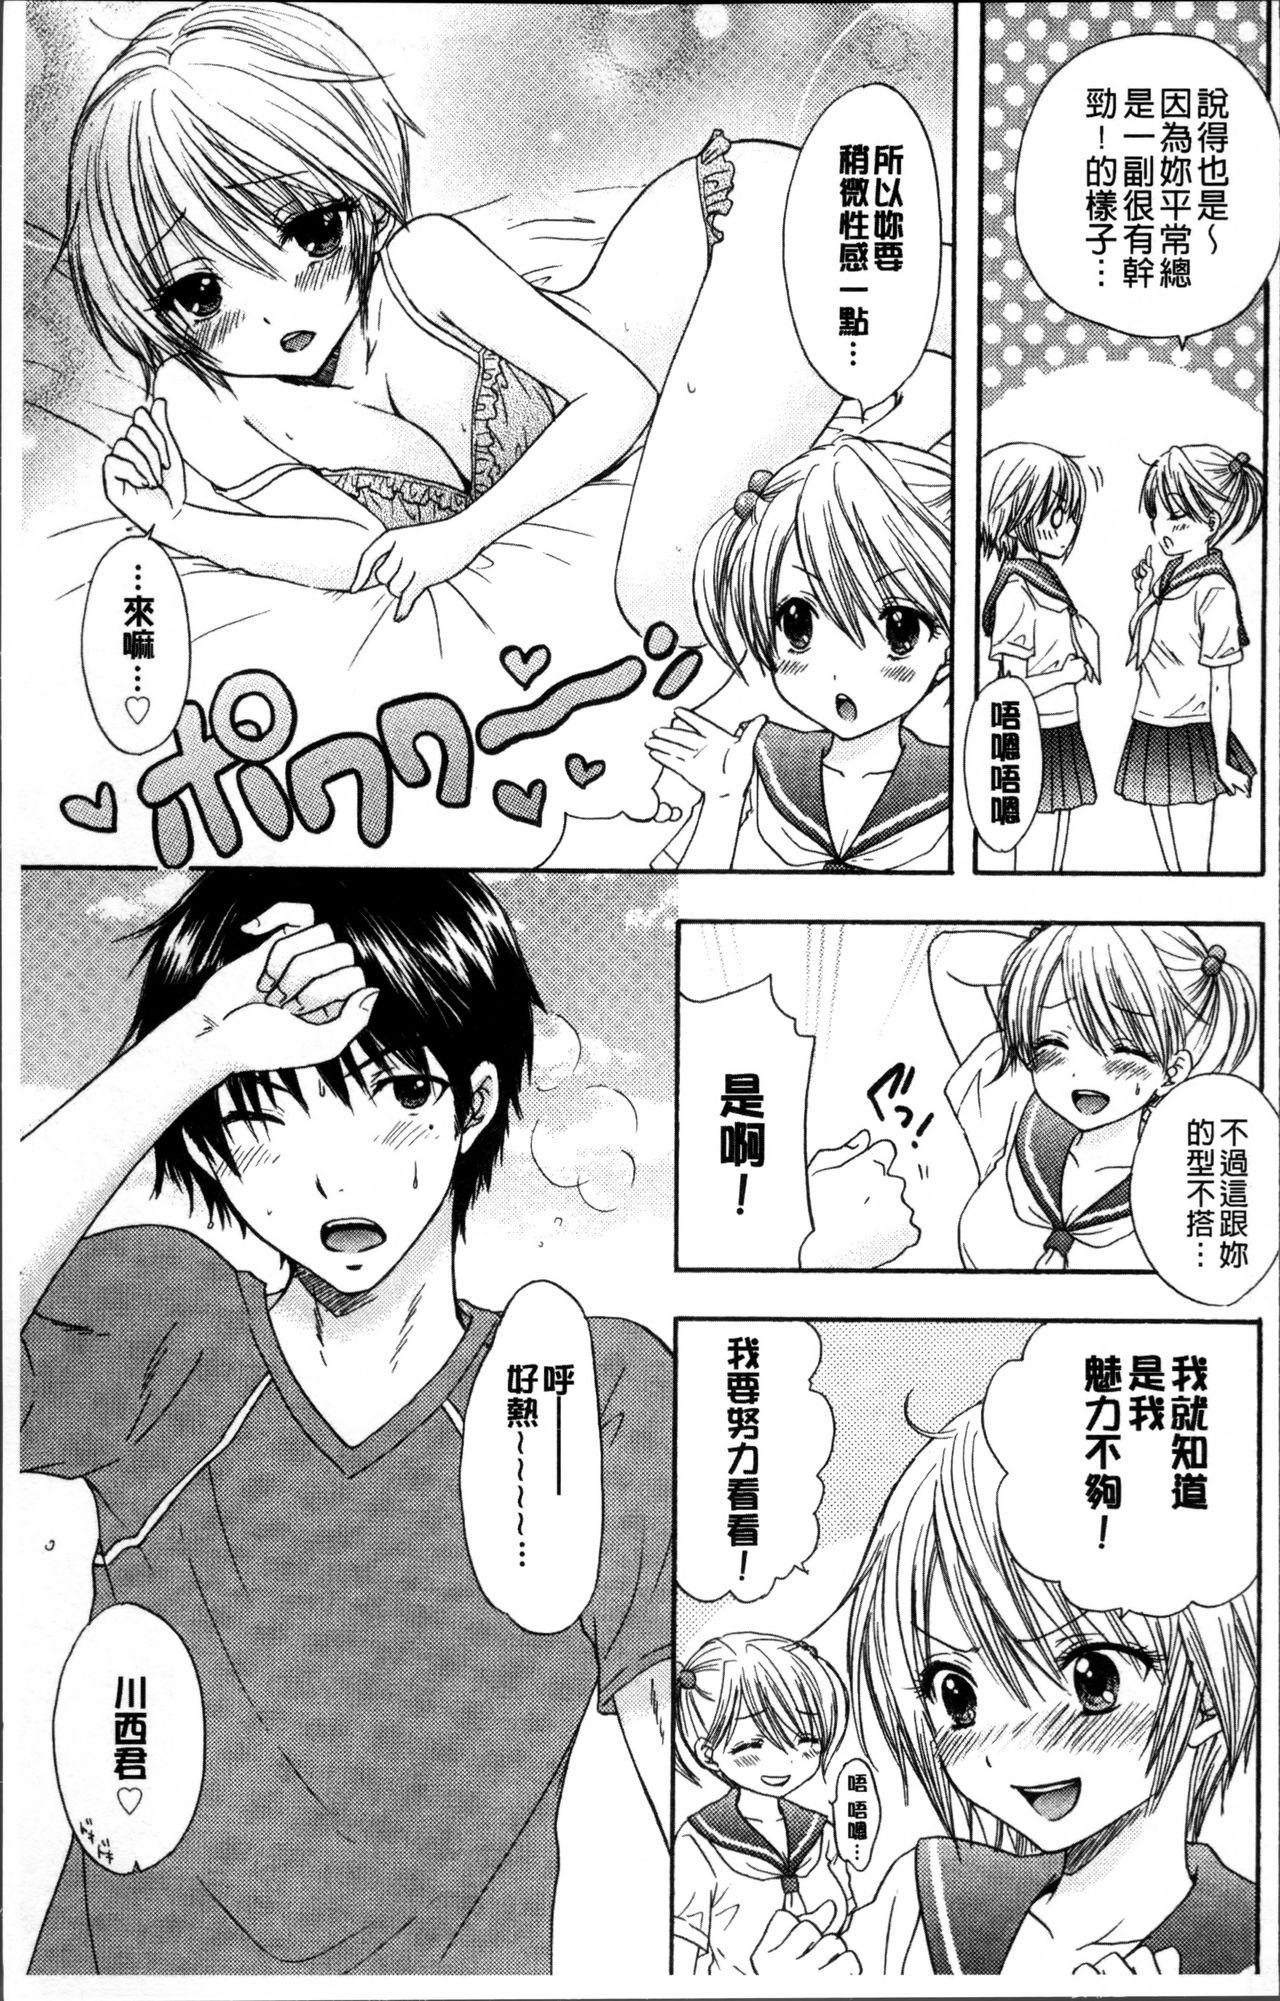 1080p Houkago Love Mode Riding - Page 10